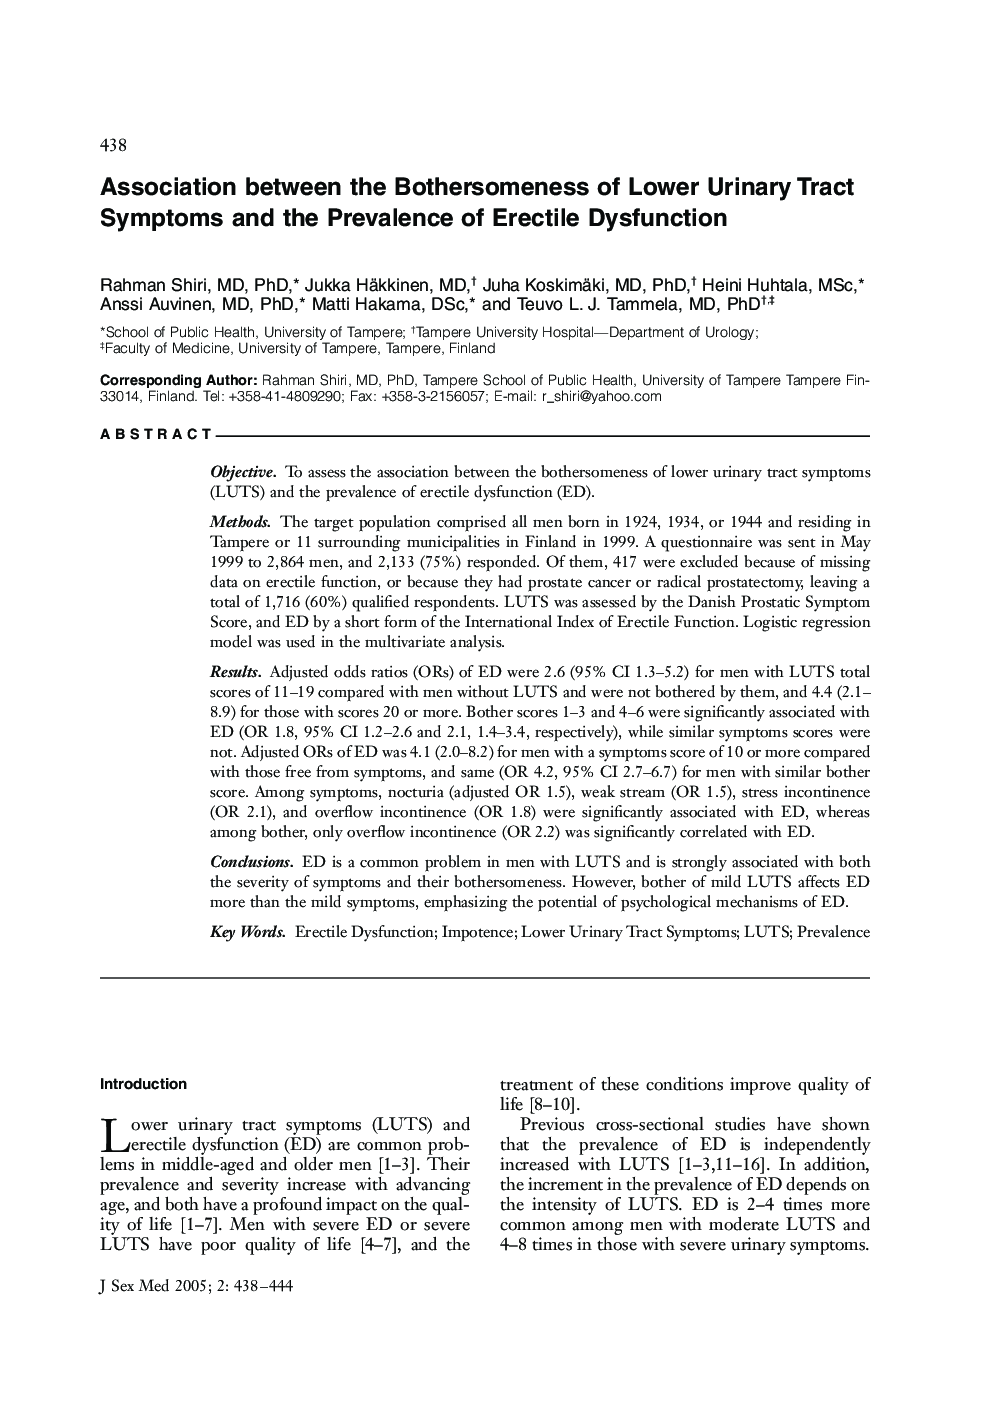 Association between the Bothersomeness of Lower Urinary Tract Symptoms and the Prevalence of Erectile Dysfunction